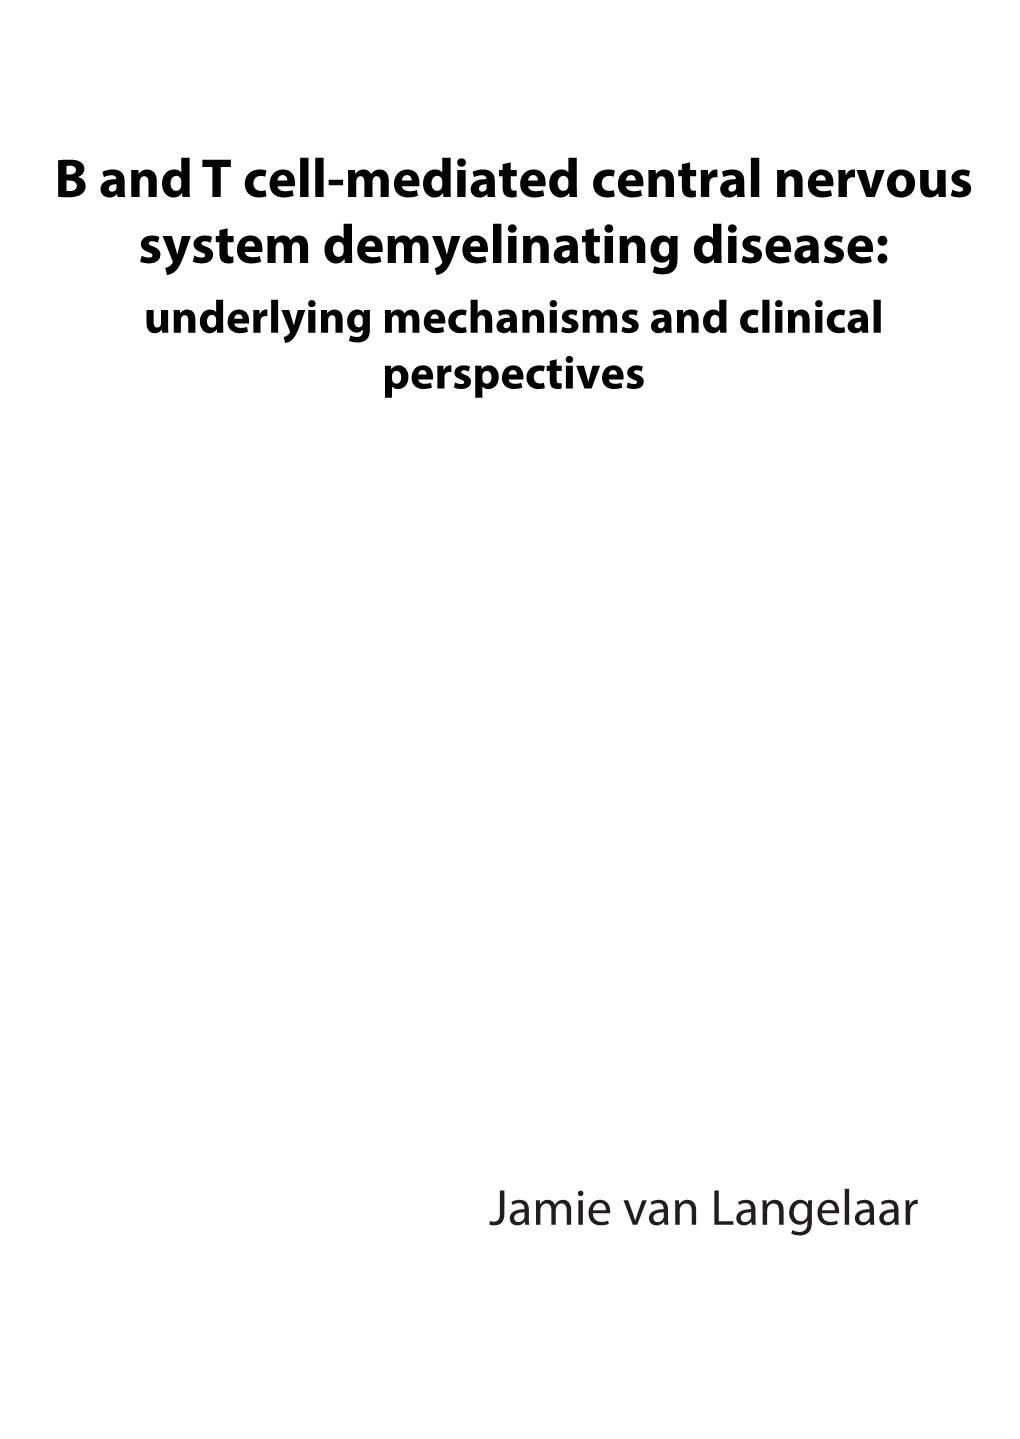 B and T Cell-Mediated Central Nervous System Demyelinating Disease: Underlying Mechanisms and Clinical Perspectives